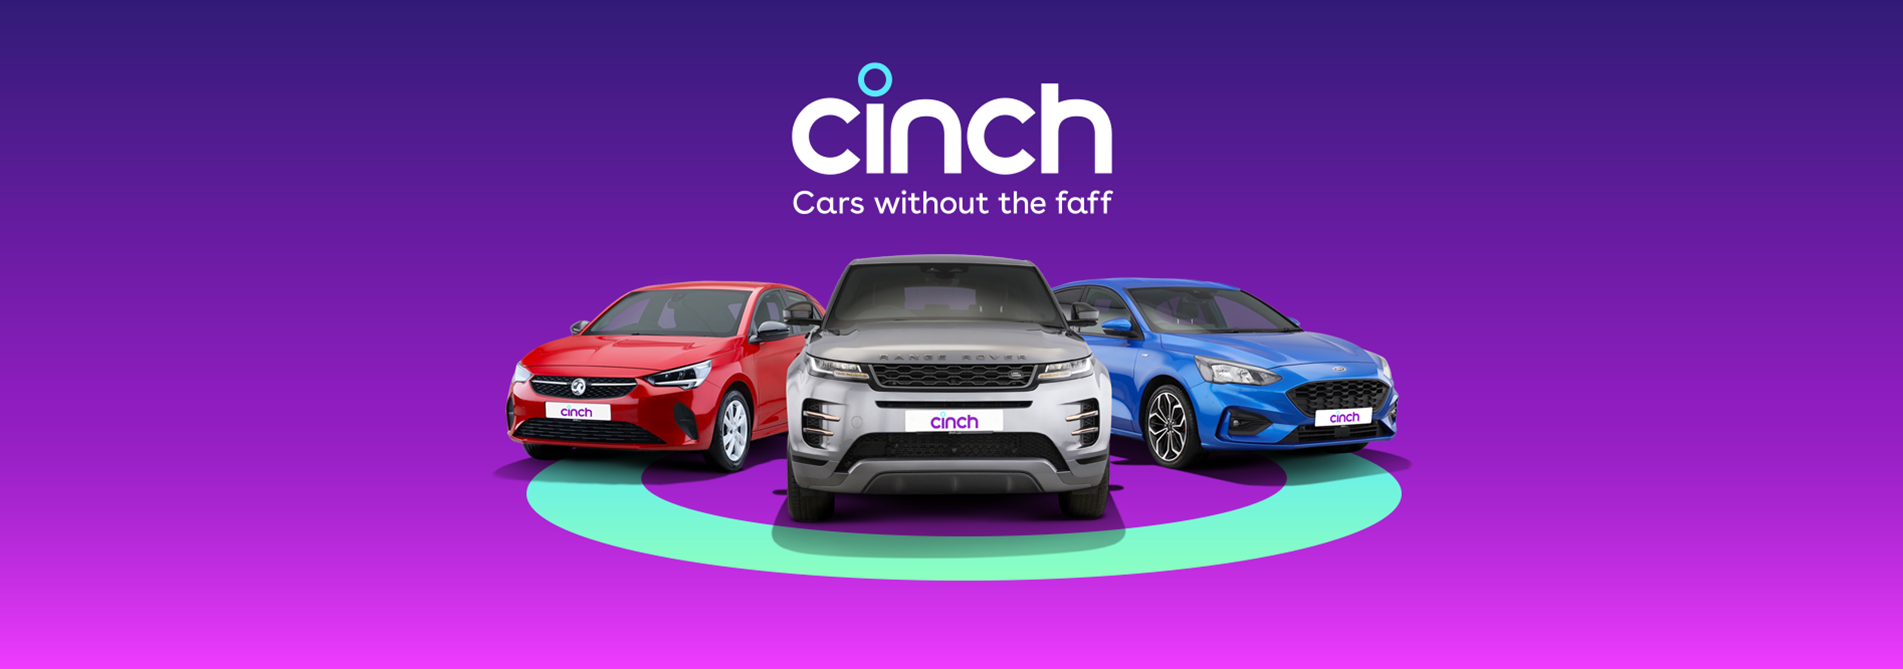 cinch - Cars without the faff on the App Store